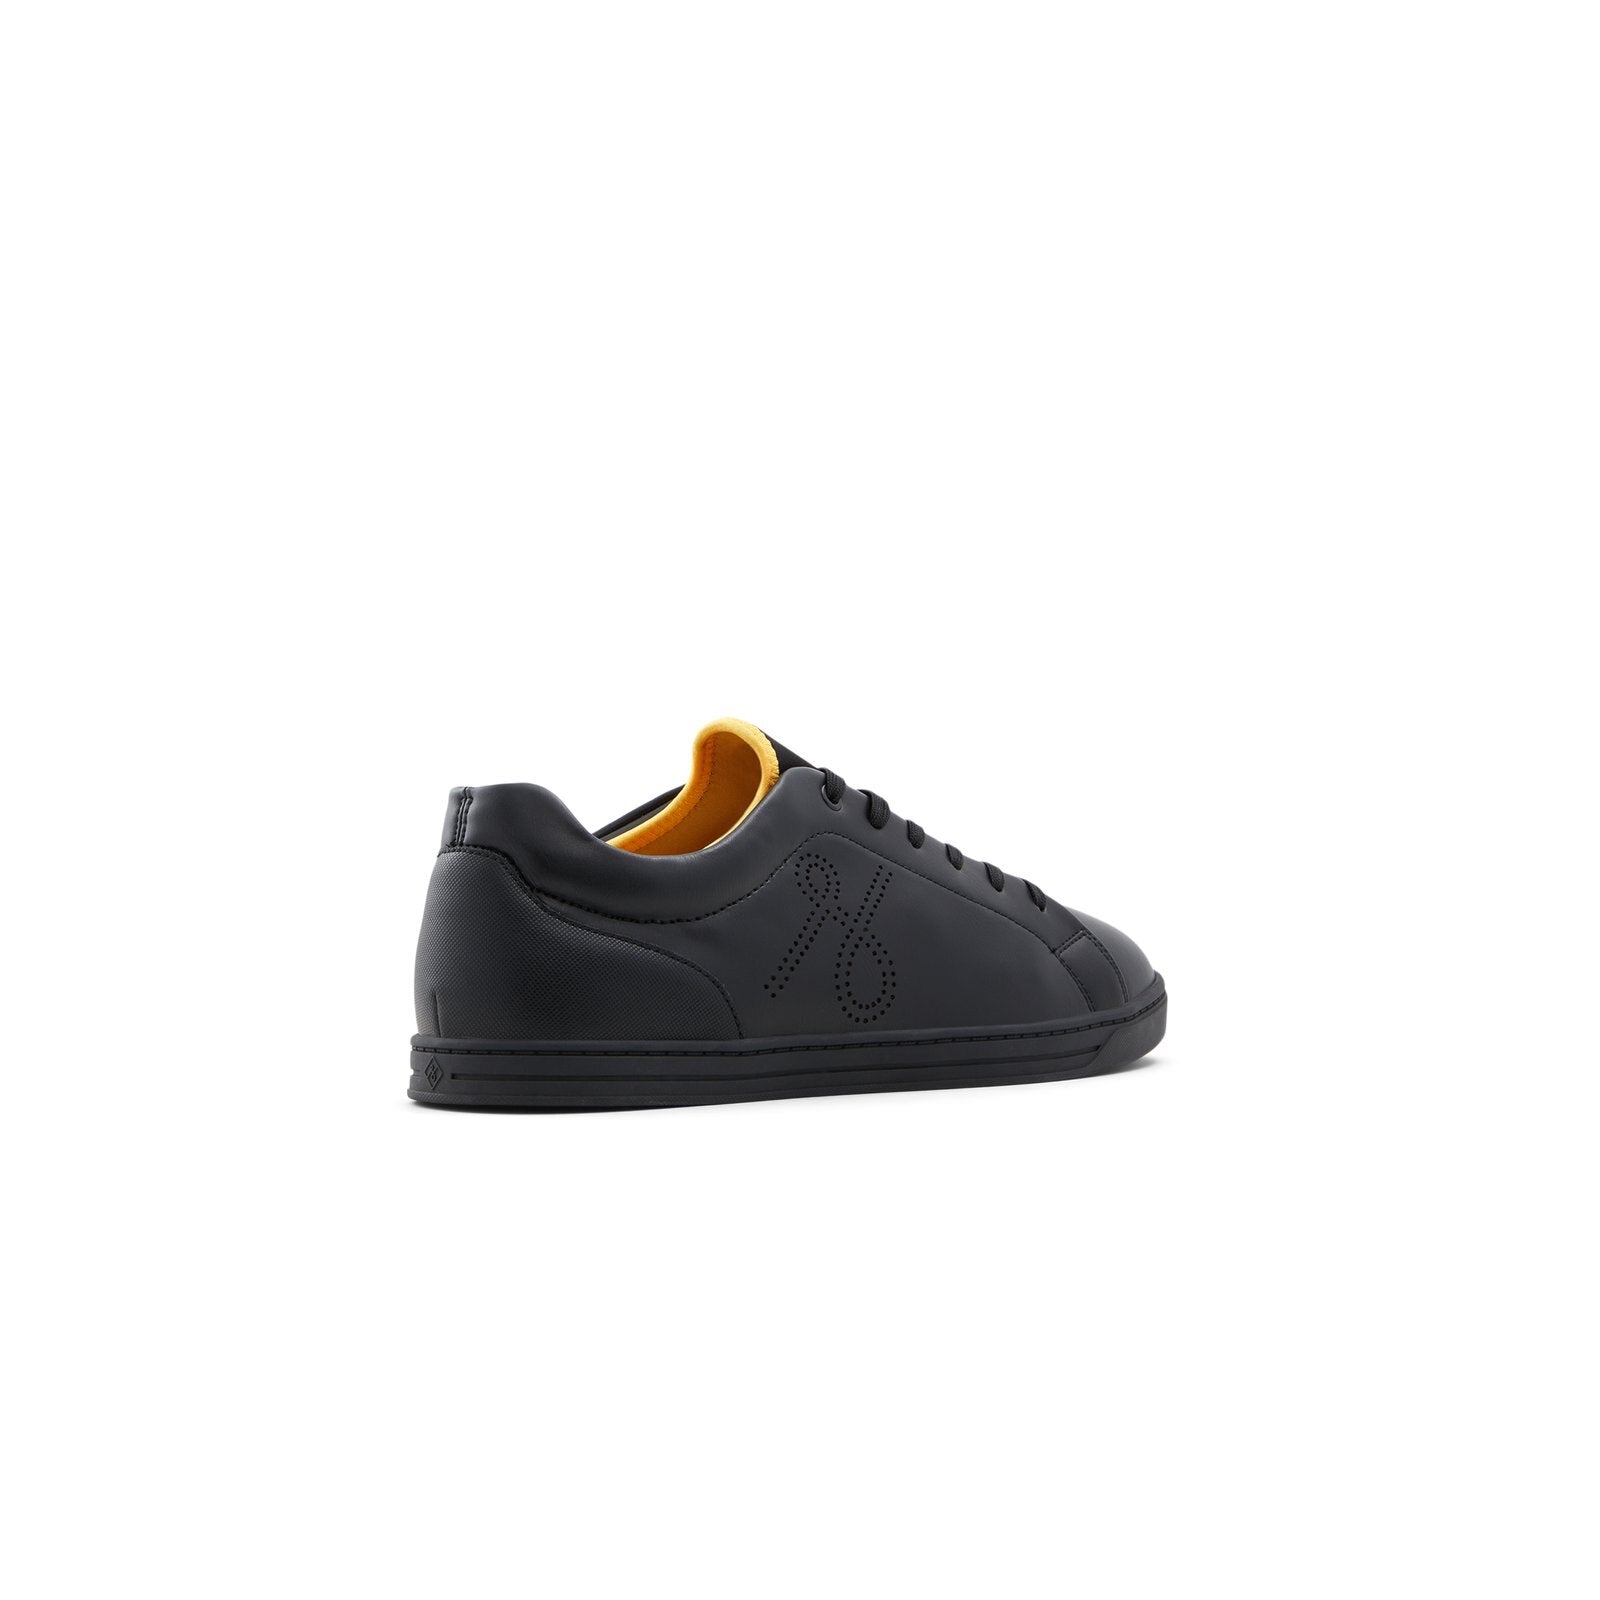 Luther / Casual Shoes Men Shoes - Black - CALL IT SPRING KSA